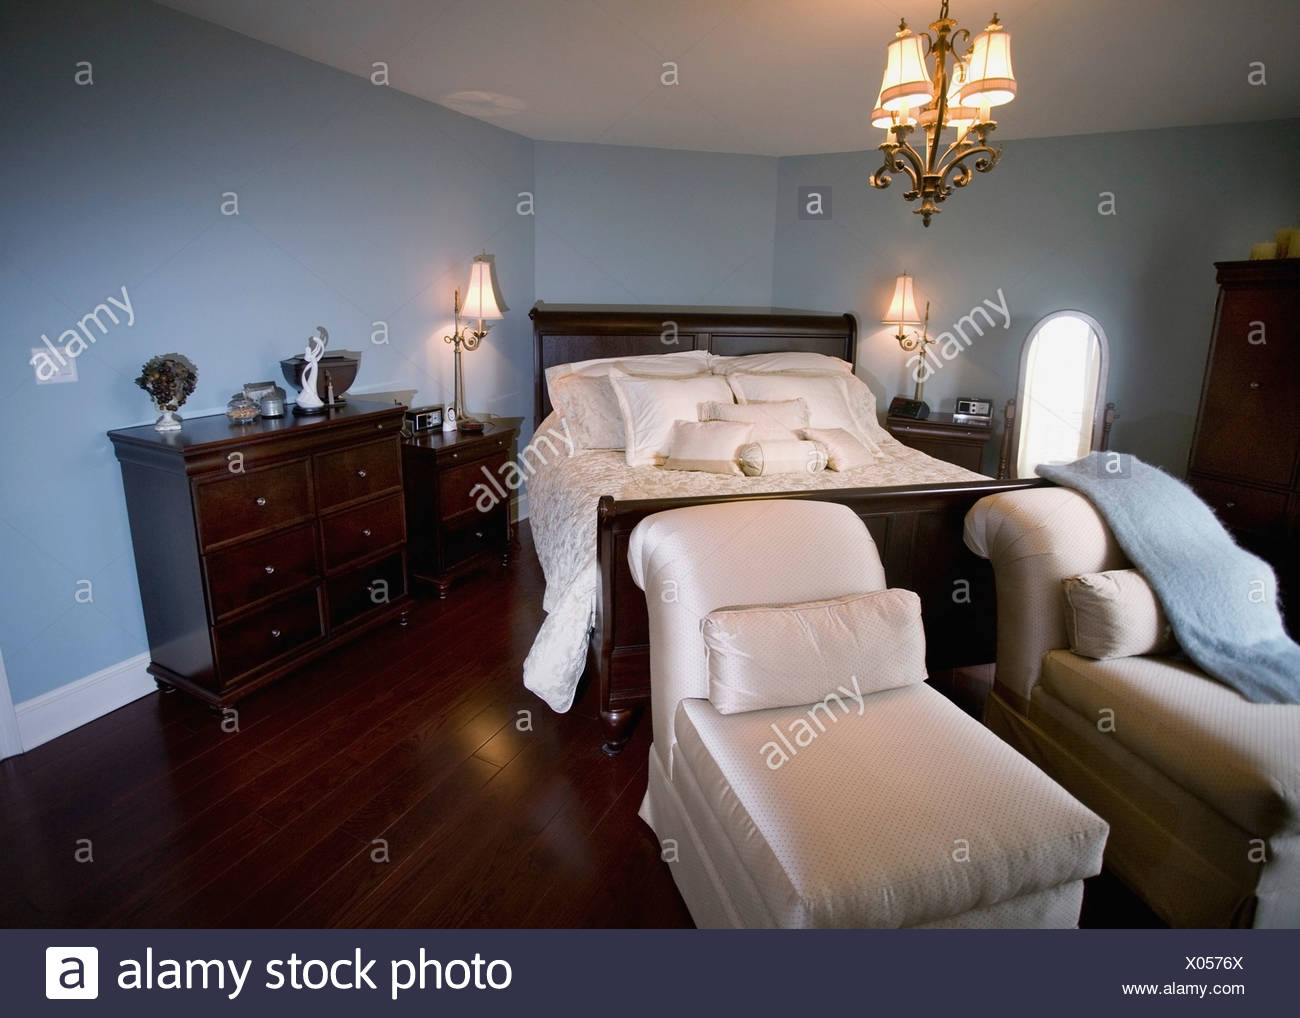 A Bedroom With Chaise Lounge Chairs At The Foot Of The Bed Stock